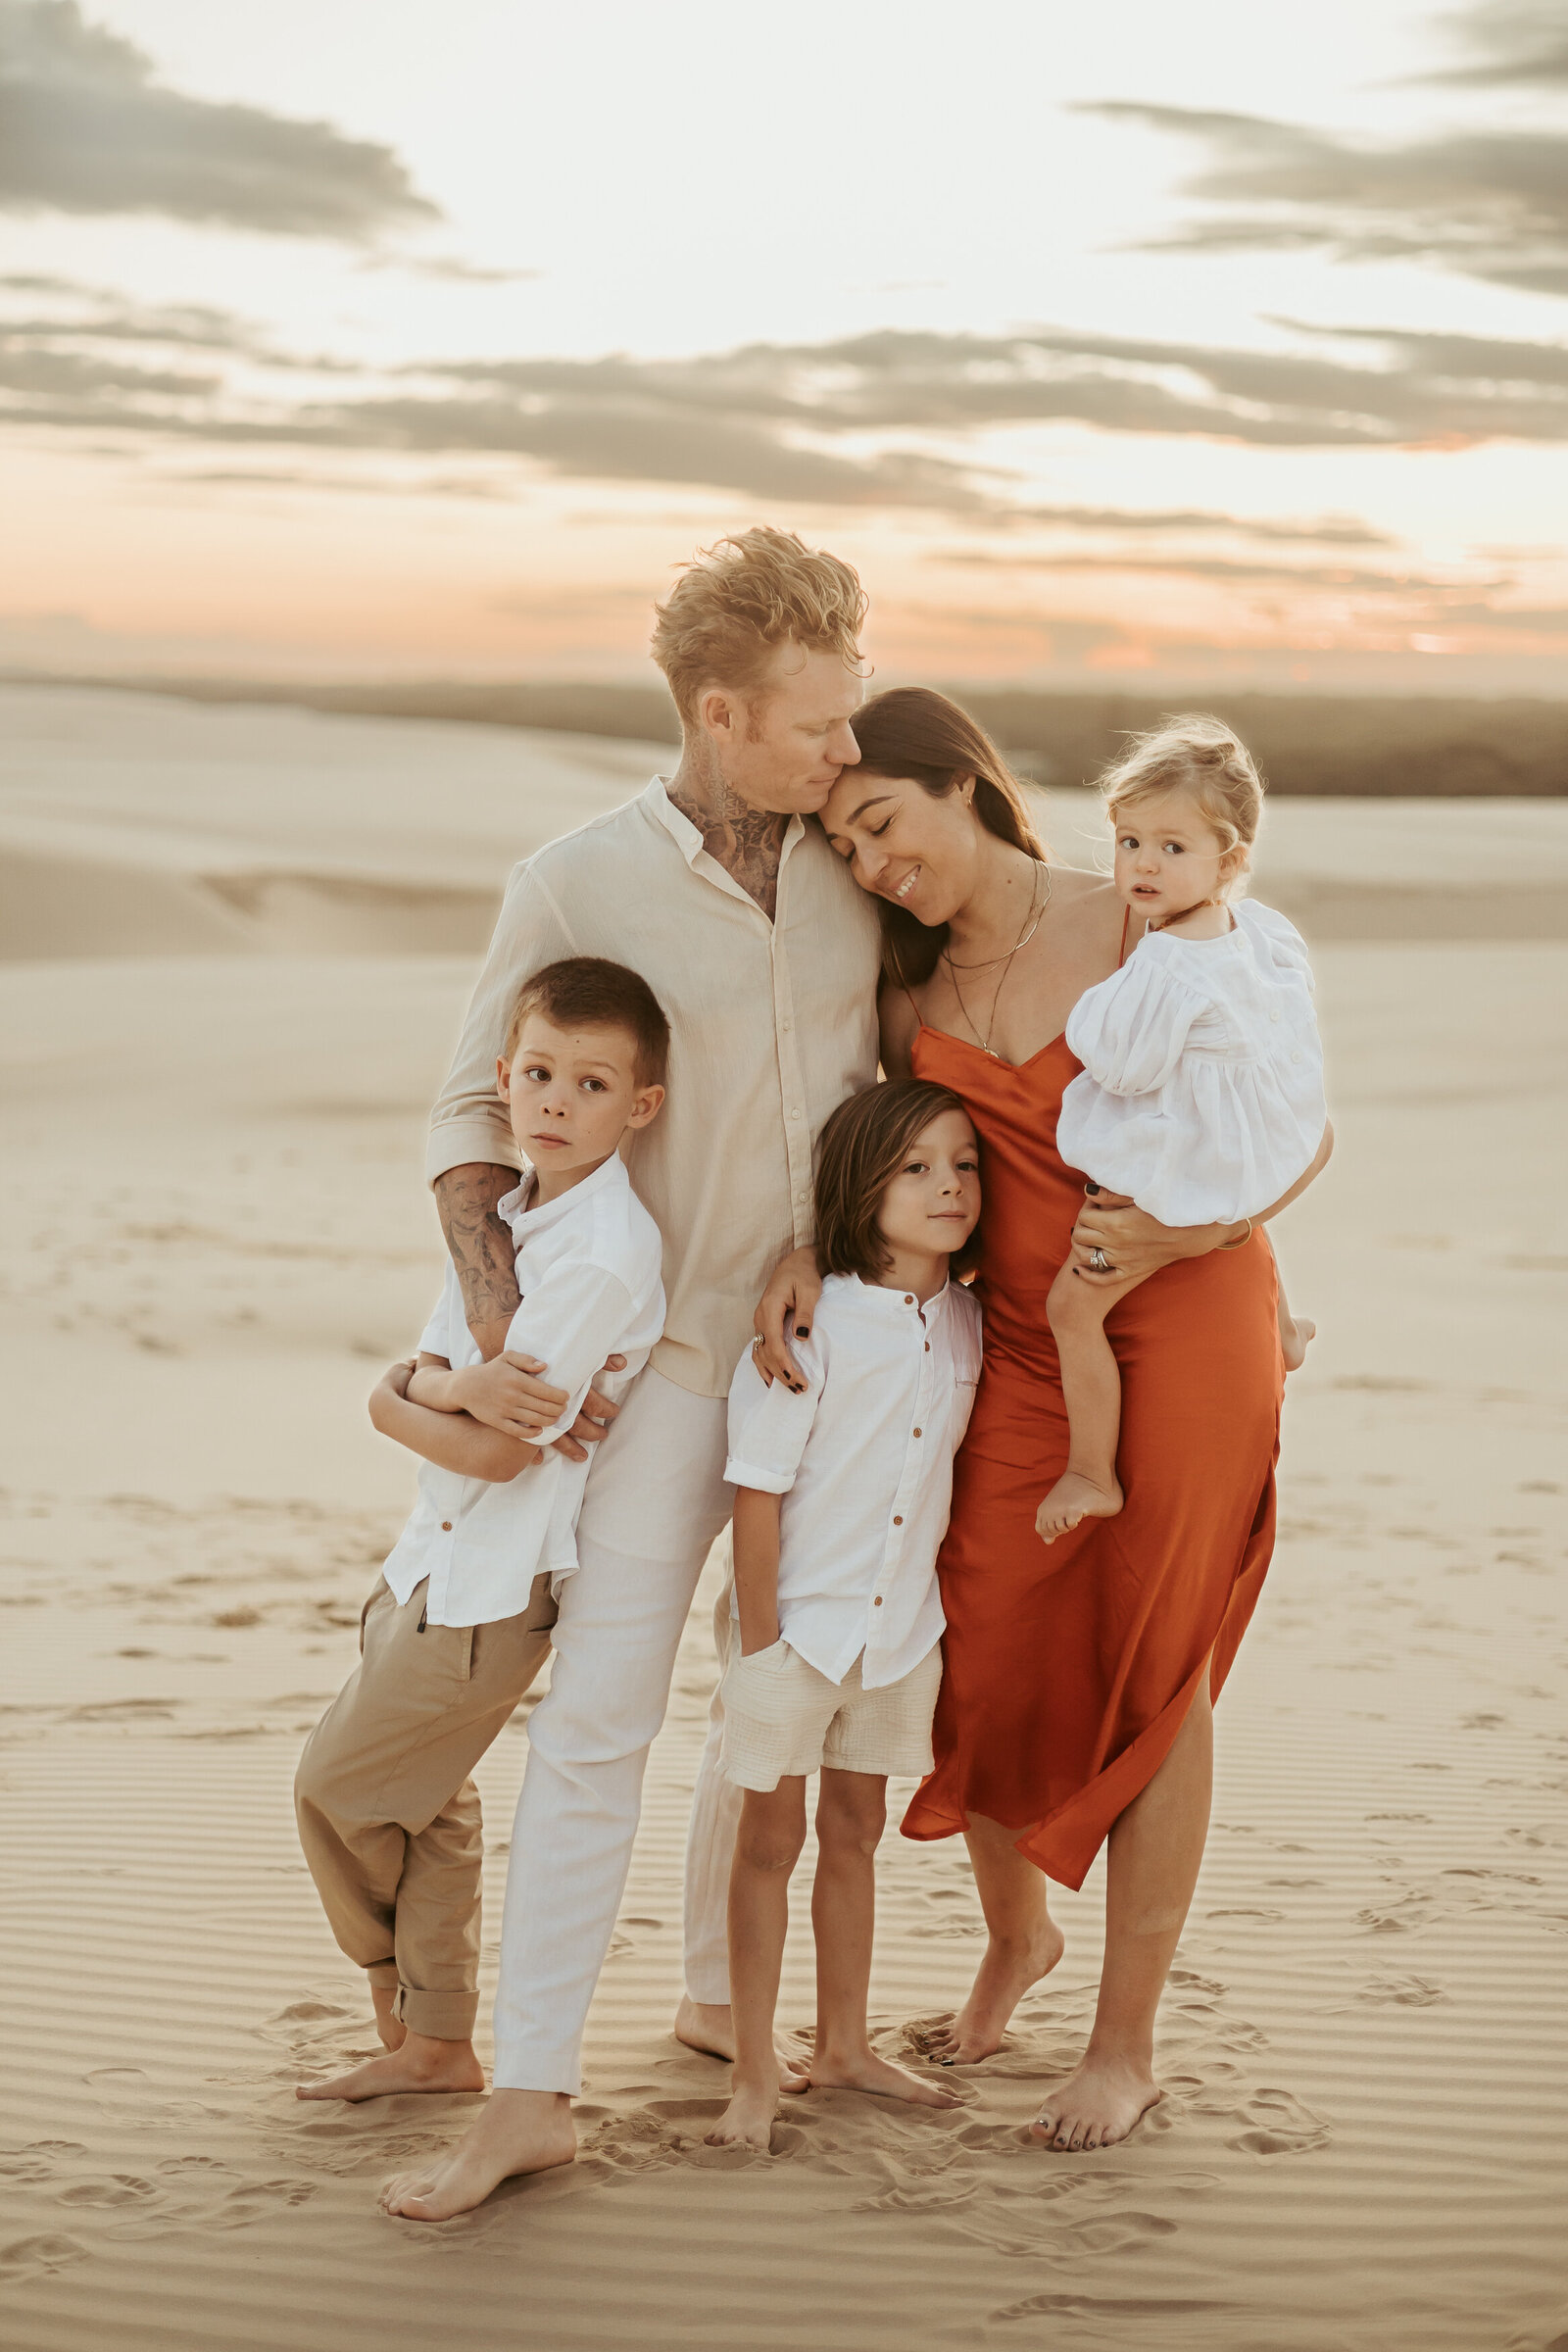 Gorgeous family of five posing for their Sydney photoshoot at the sand dunes at sunset.